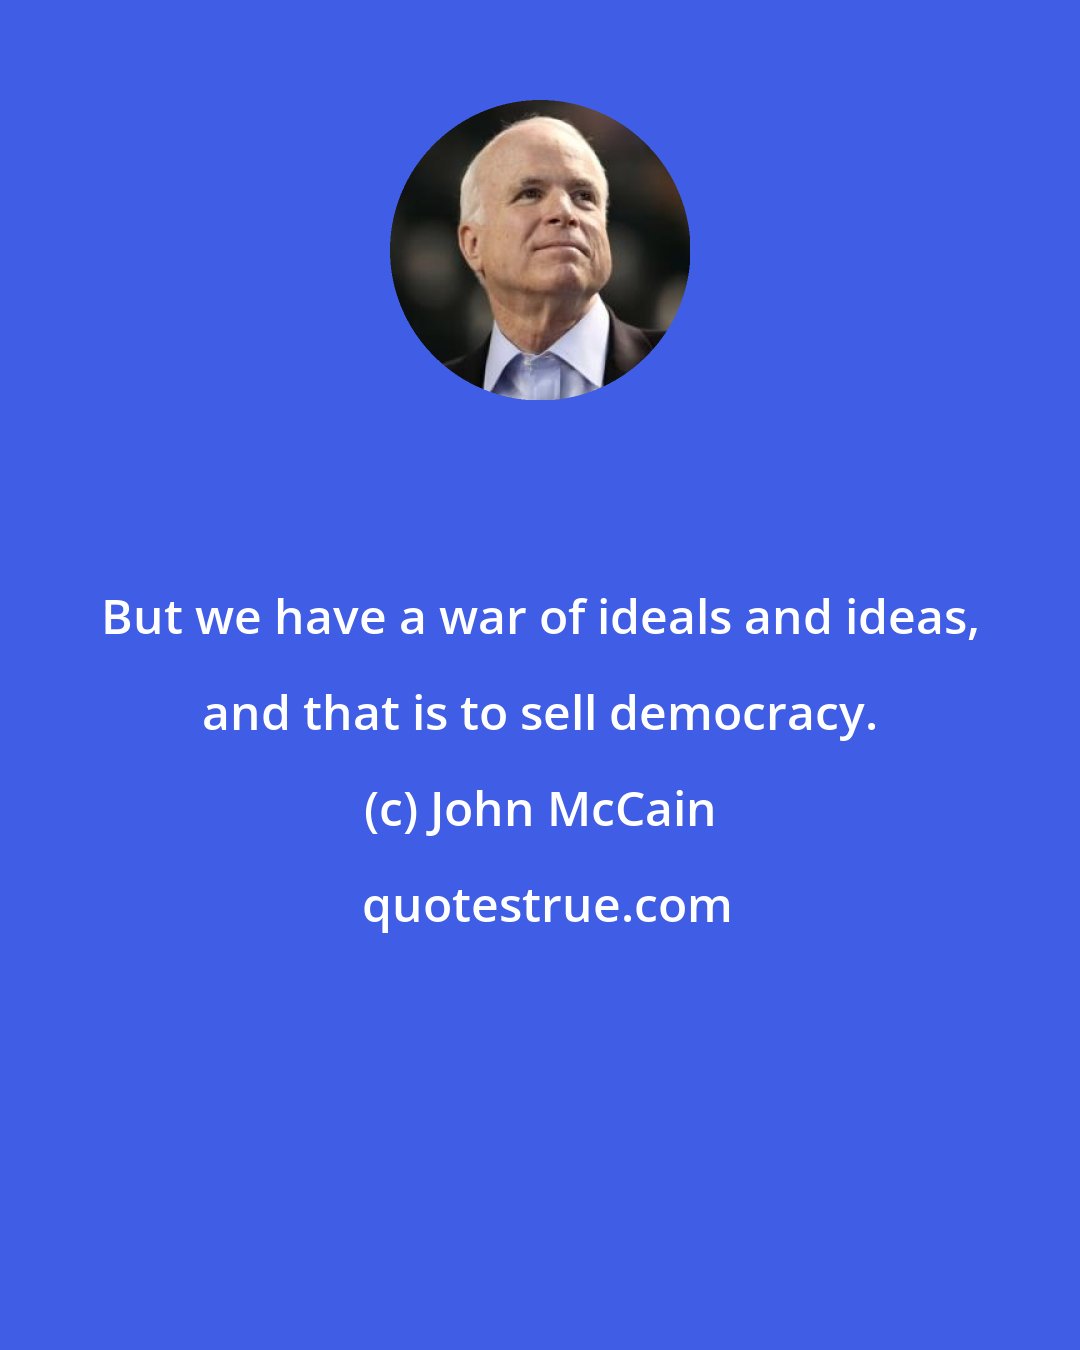 John McCain: But we have a war of ideals and ideas, and that is to sell democracy.